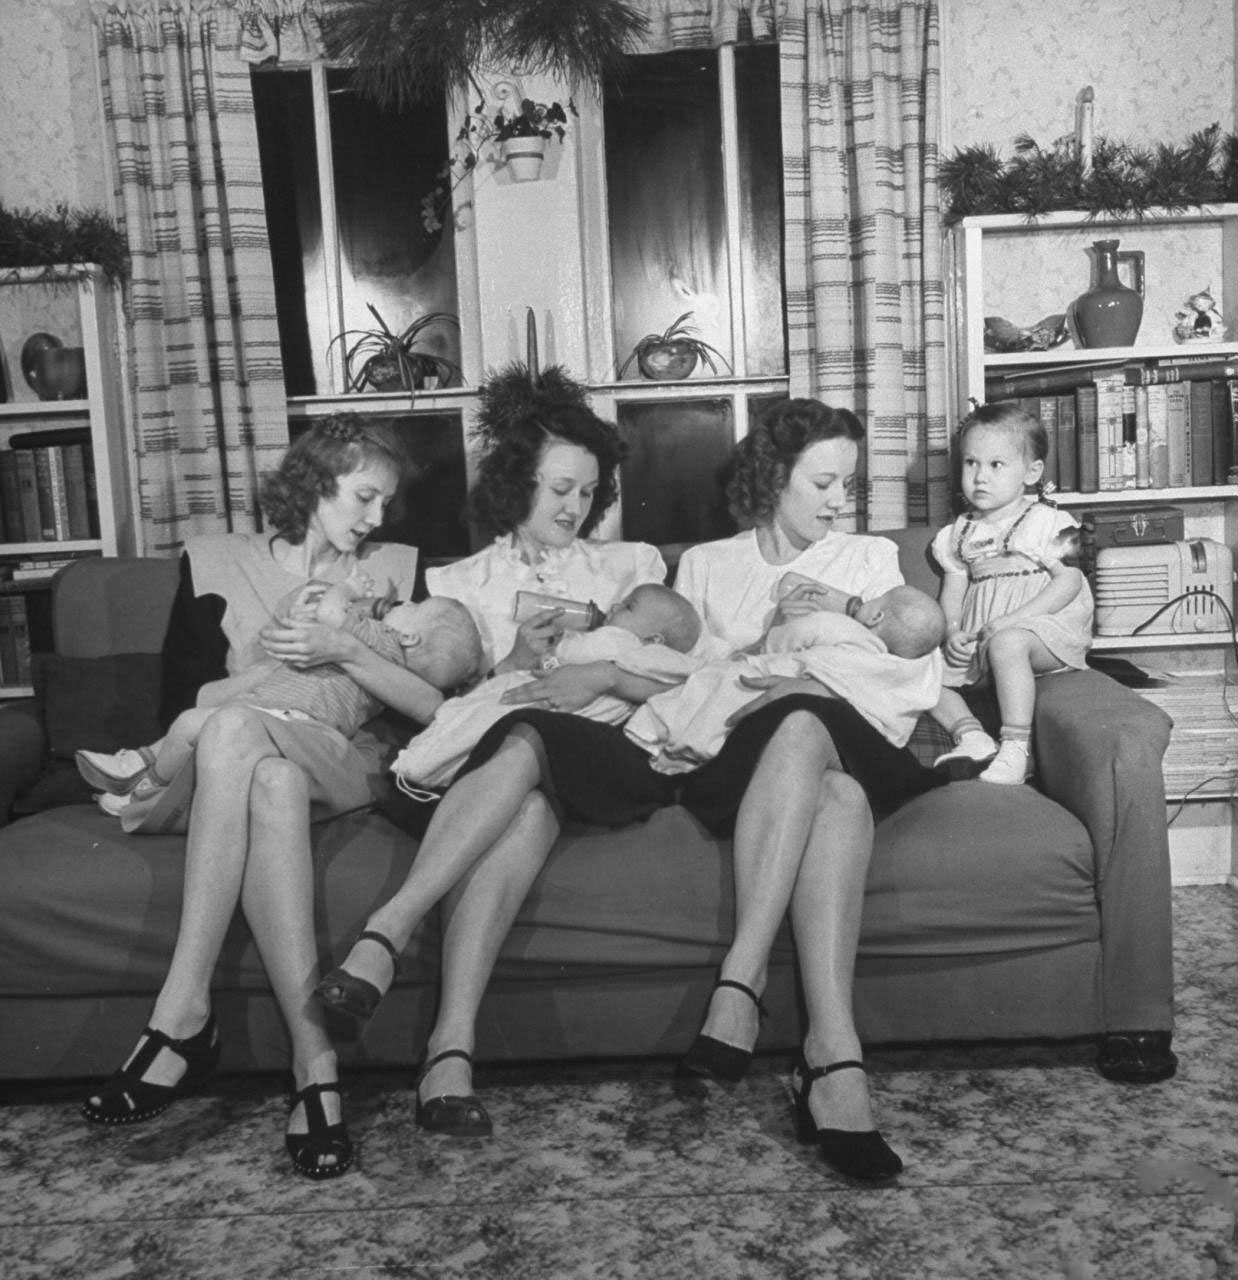 Daughters of James Ferdinand Irwin bottle-feeding their babies at Christmas family reunion celebration marking the return of Irwin's sons fr. service in WWII, L-R: Jeanne Haney & son Joe, Myra Lee Love & son John, Betty Roush and her daughters Julia Ann .